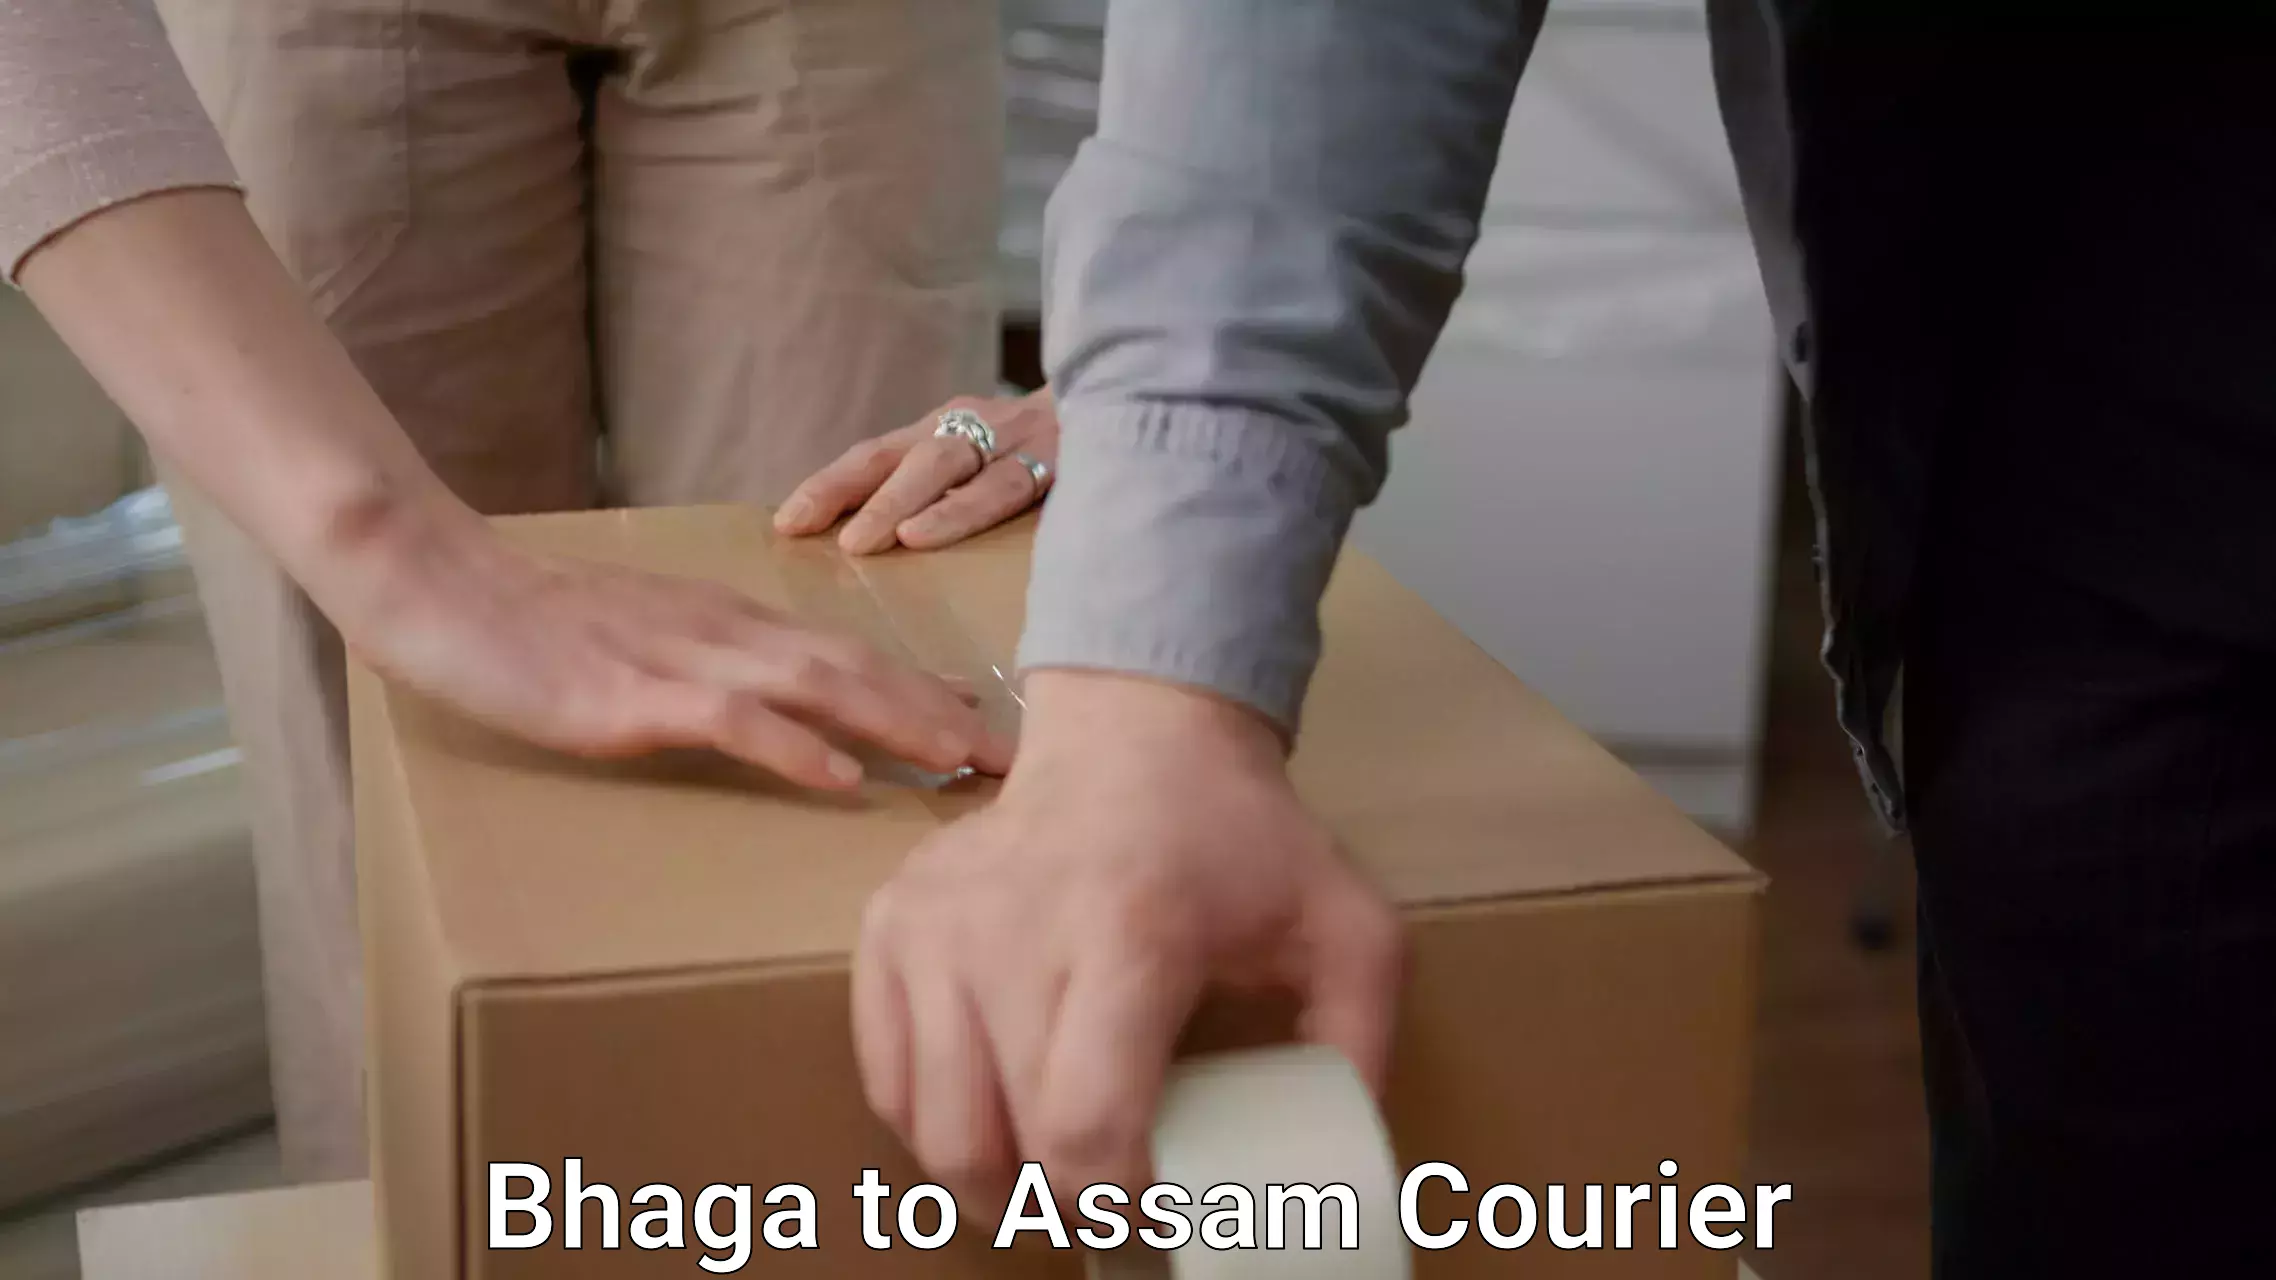 Customized moving experience Bhaga to Assam